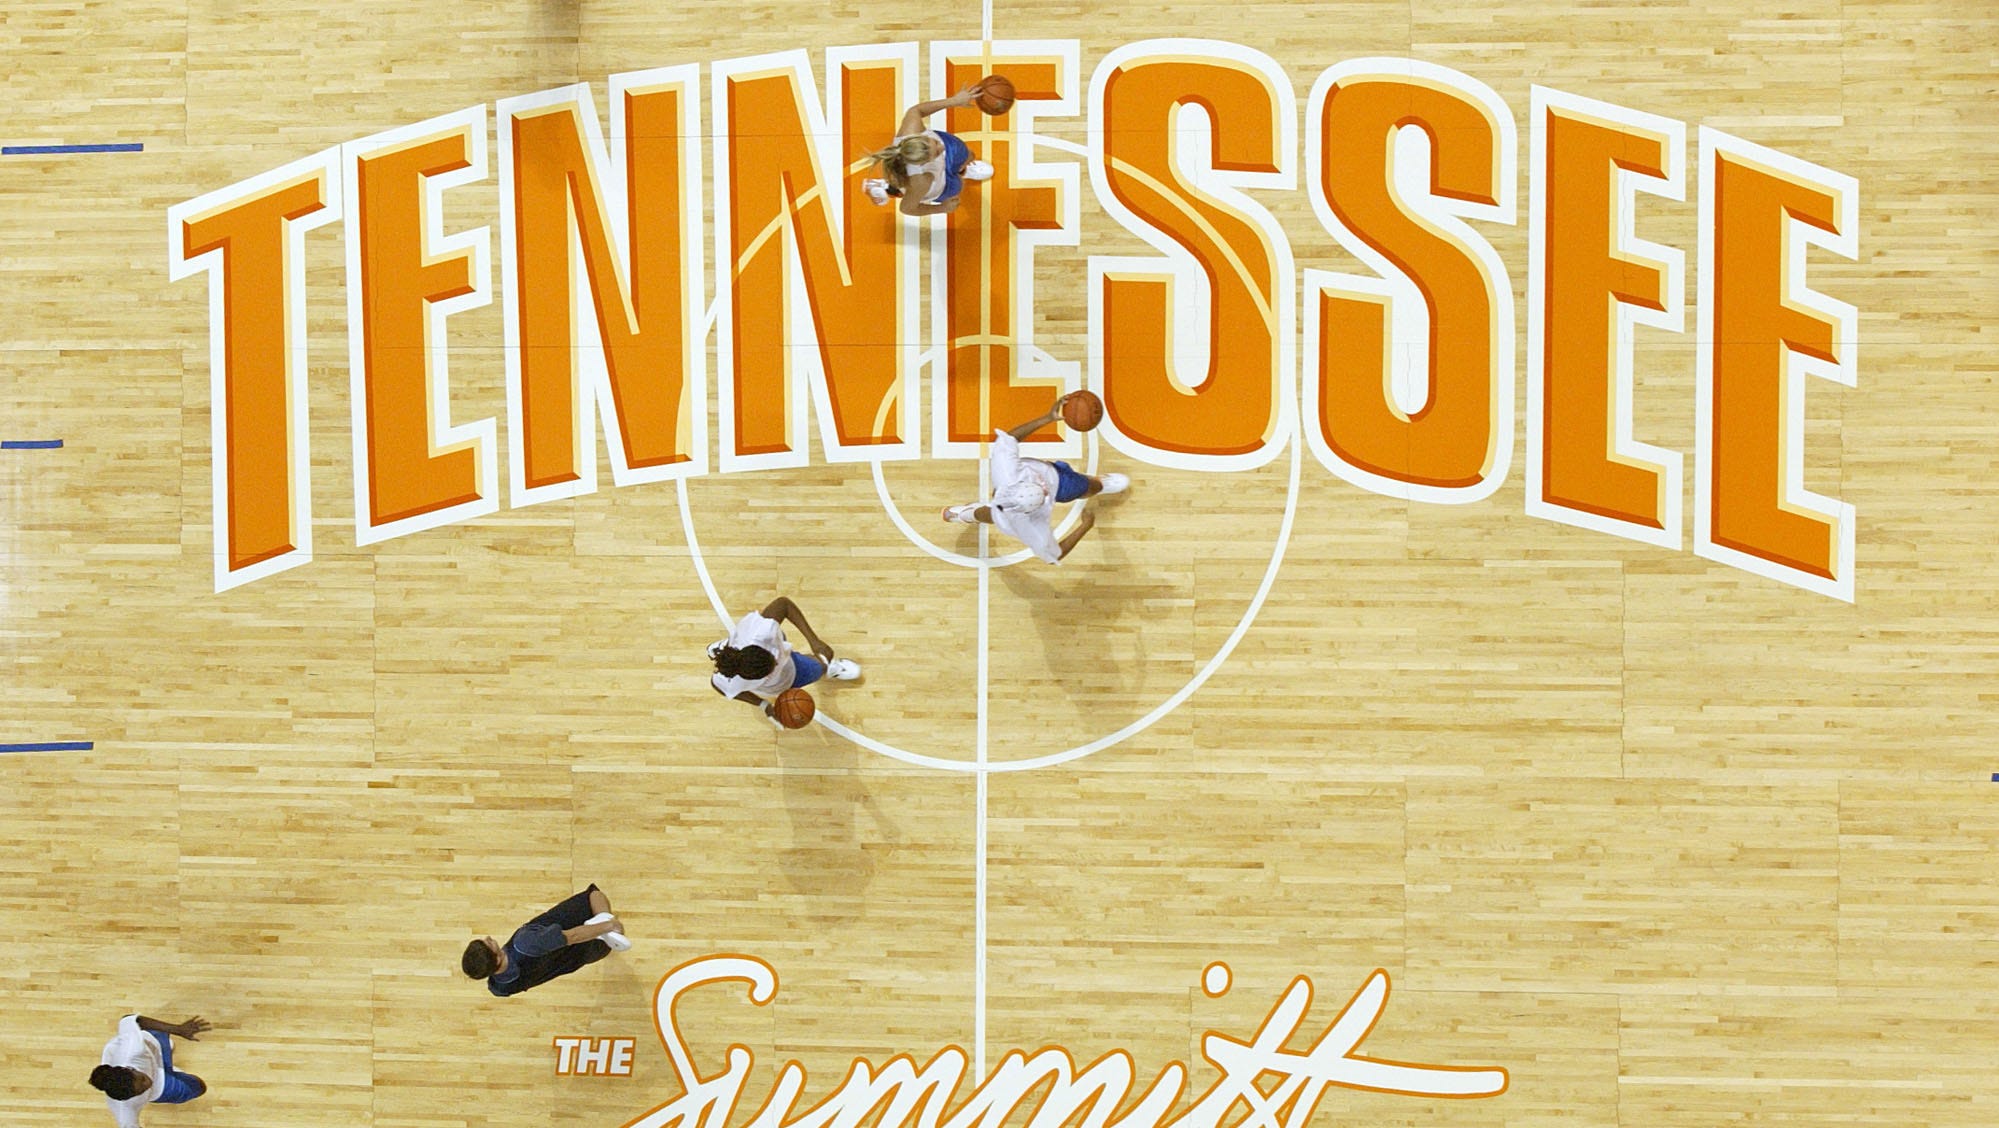 Authors tell how Pat Summitt changed the game in 'Full Court Press'